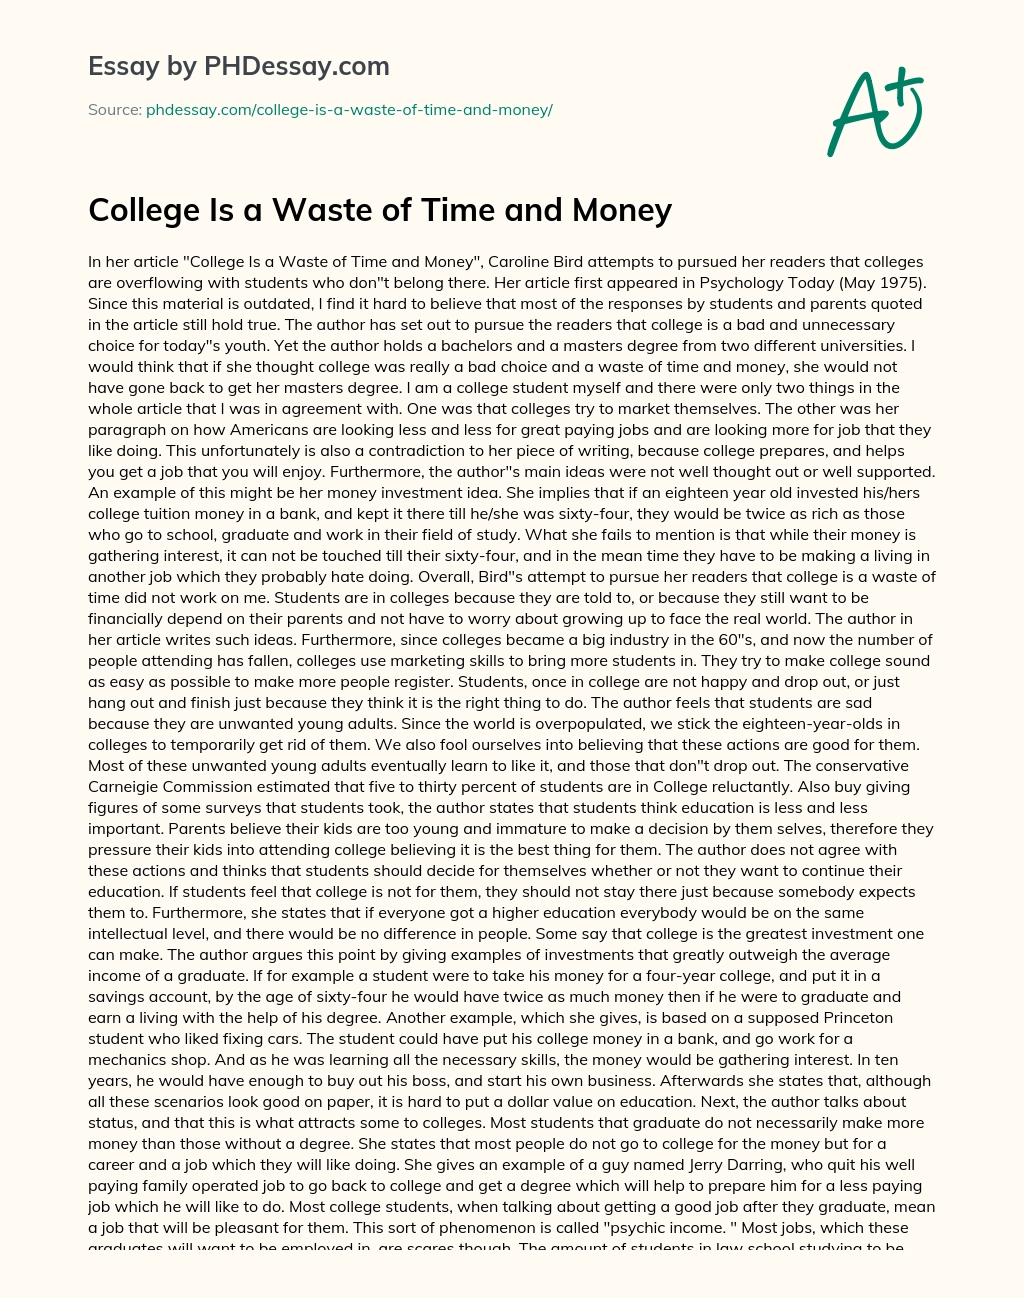 College Is a Waste of Time and Money essay